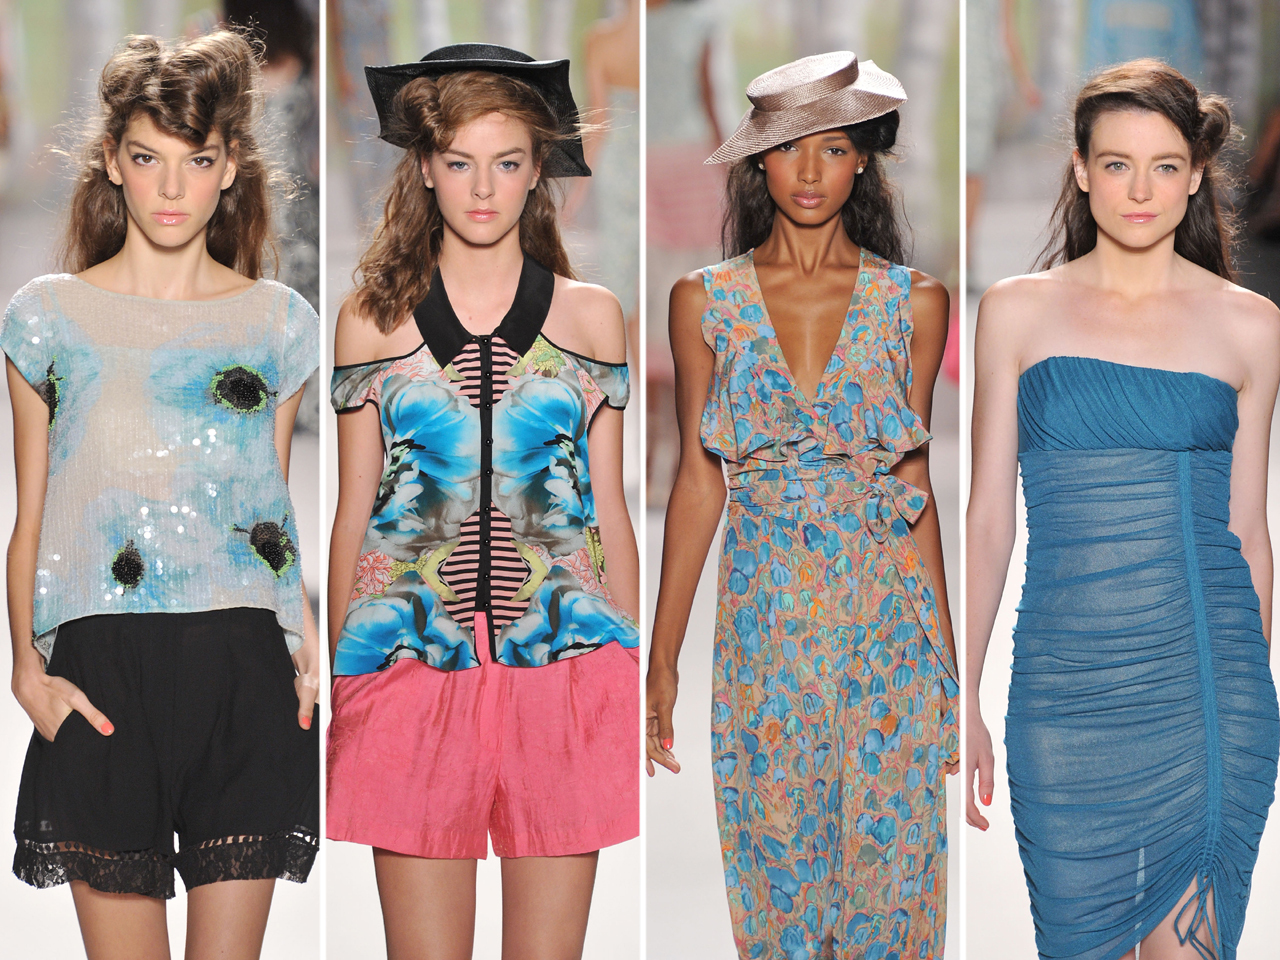 Tracy Reese: Nature inspired Spring/Summer 2012 collection - CBS News